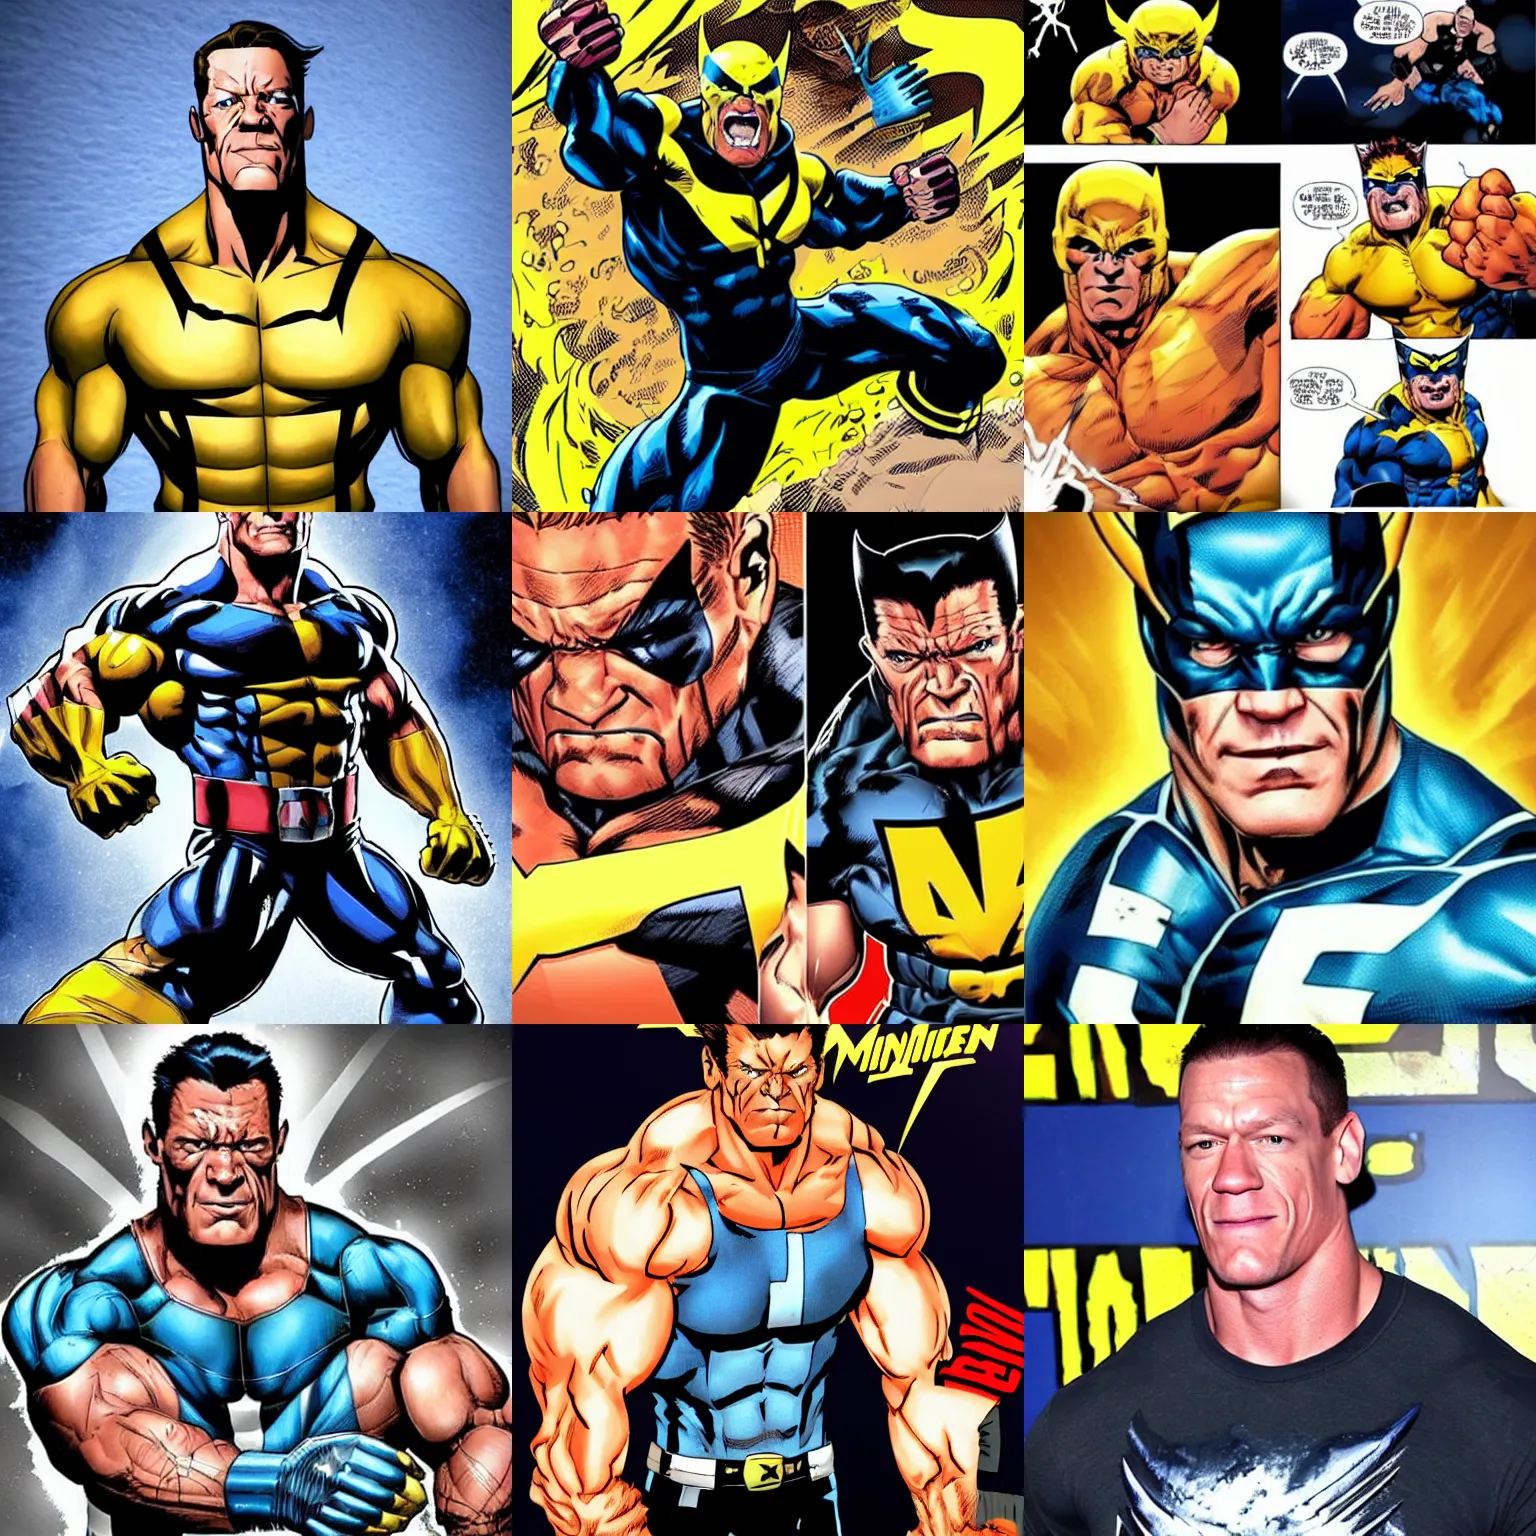 Prompt: John cena as wolverine from the x men